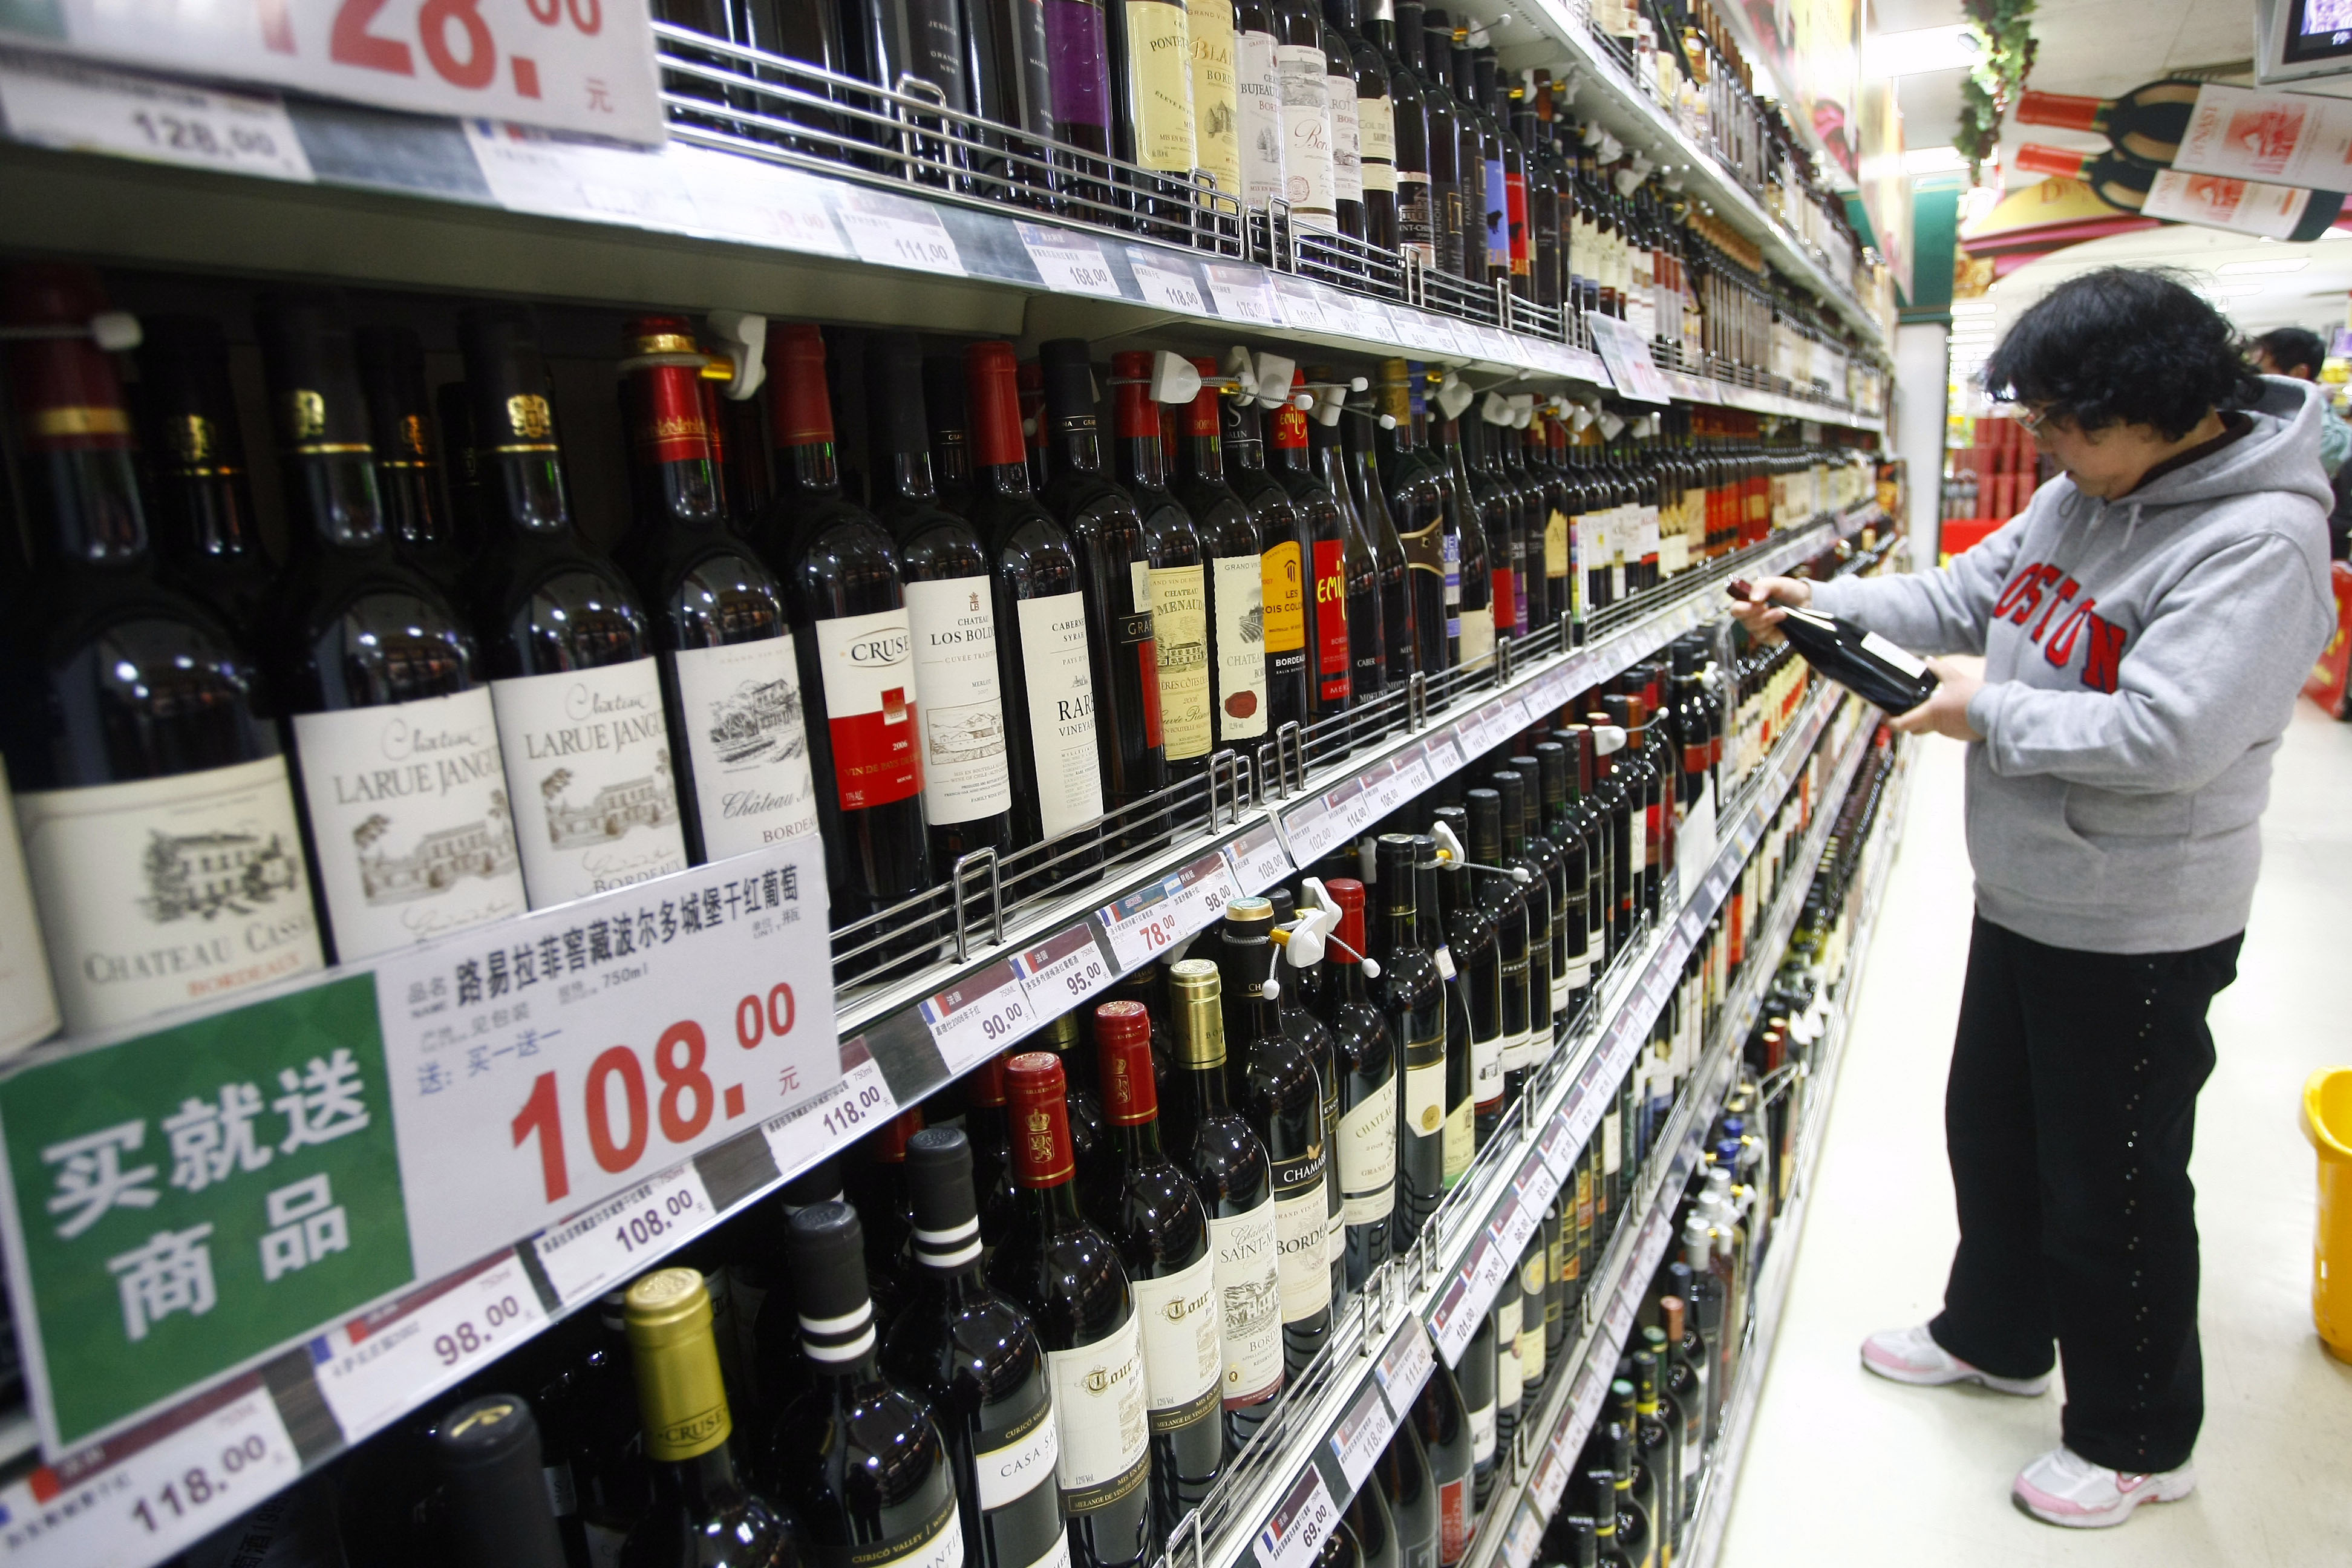 96% of Chateau Lafite sold in China is counterfeit --File--A customer shops for red wine imported from France at a supermarket in Shanghai, China, 15 December 2010. Chinas Ministry of Commerce is cracking down on the counterfeit wine industry in the country, reports Guangxi News Net. In a small workshop in the eastern province of Zhejiang, authorities uncovered 420,000 homemade wine labels intended to be affixed to counterfeit bottles of French wine. A local commerce department has also found 5,397 bottles of counterfeit red wine on the shelves at Cheng Sheng supermarkets. The bottles were traced back to the city of Yantai in Shandong province. Locals told commerce officials that the wine only cost 7 yuan (US$1.10) a bottle to manufacture. The wine advertises itself as French winemaker Castels only official product in China and is sold for more than 1,000 yuan (US$158) per bottle. The color of the wine is the same as the real product but is made of chemical raw materials and contains n